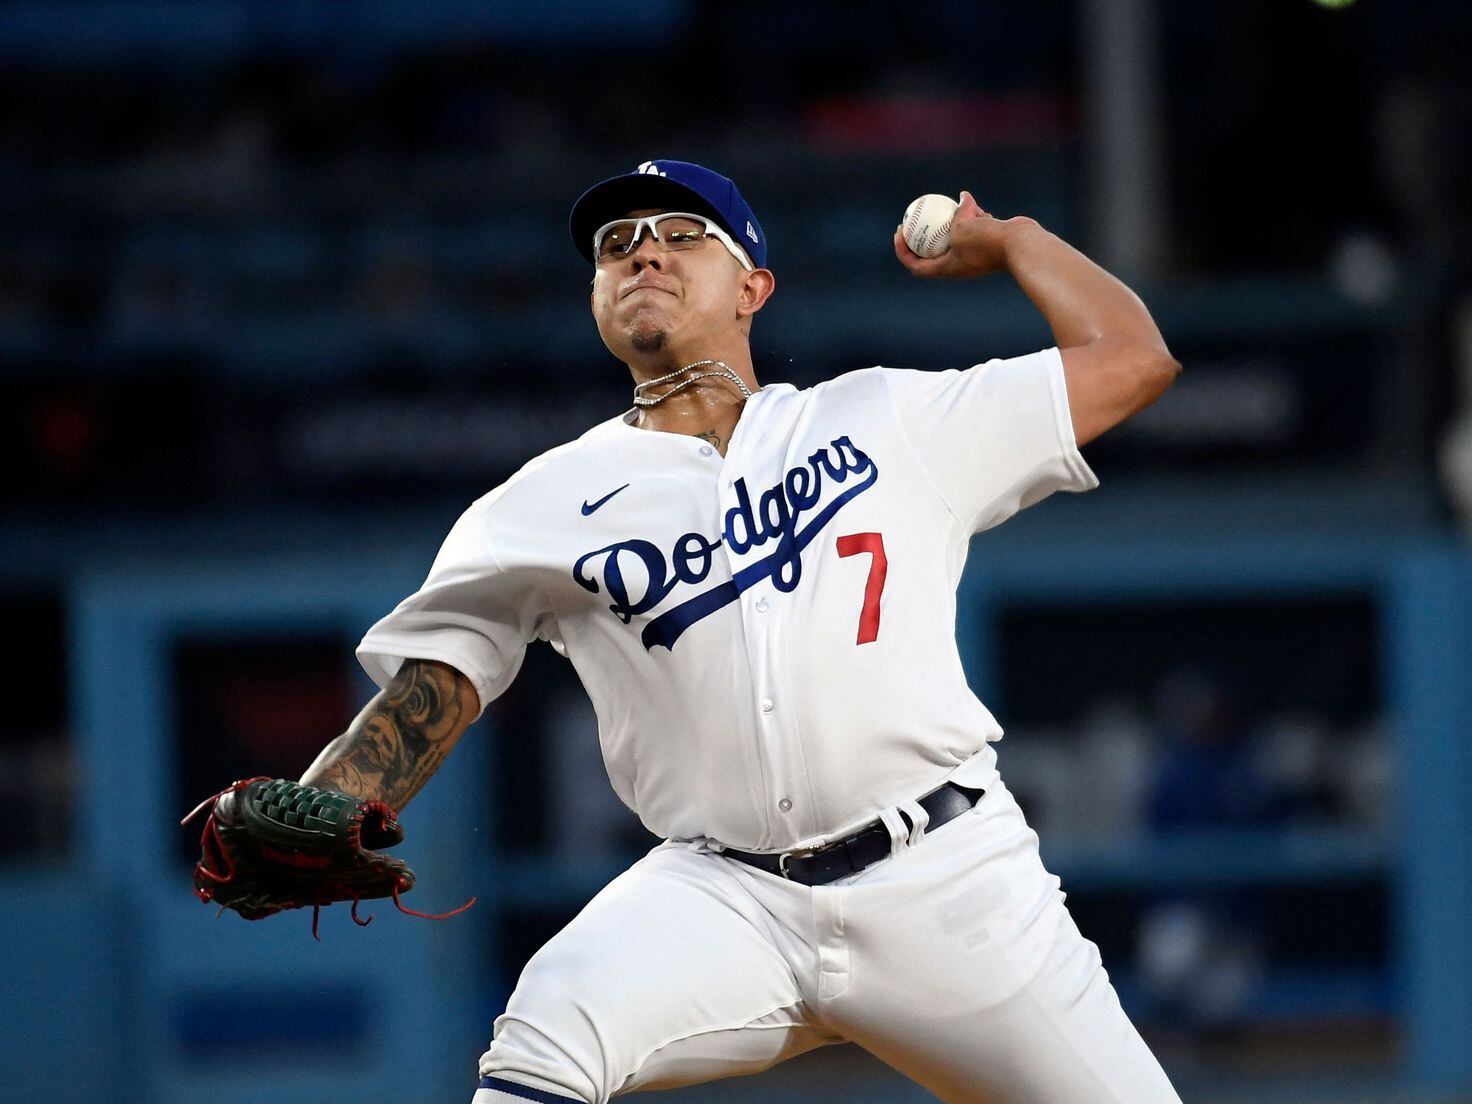 Looking ahead: Julio Urias, 19, gets another shot for Dodgers